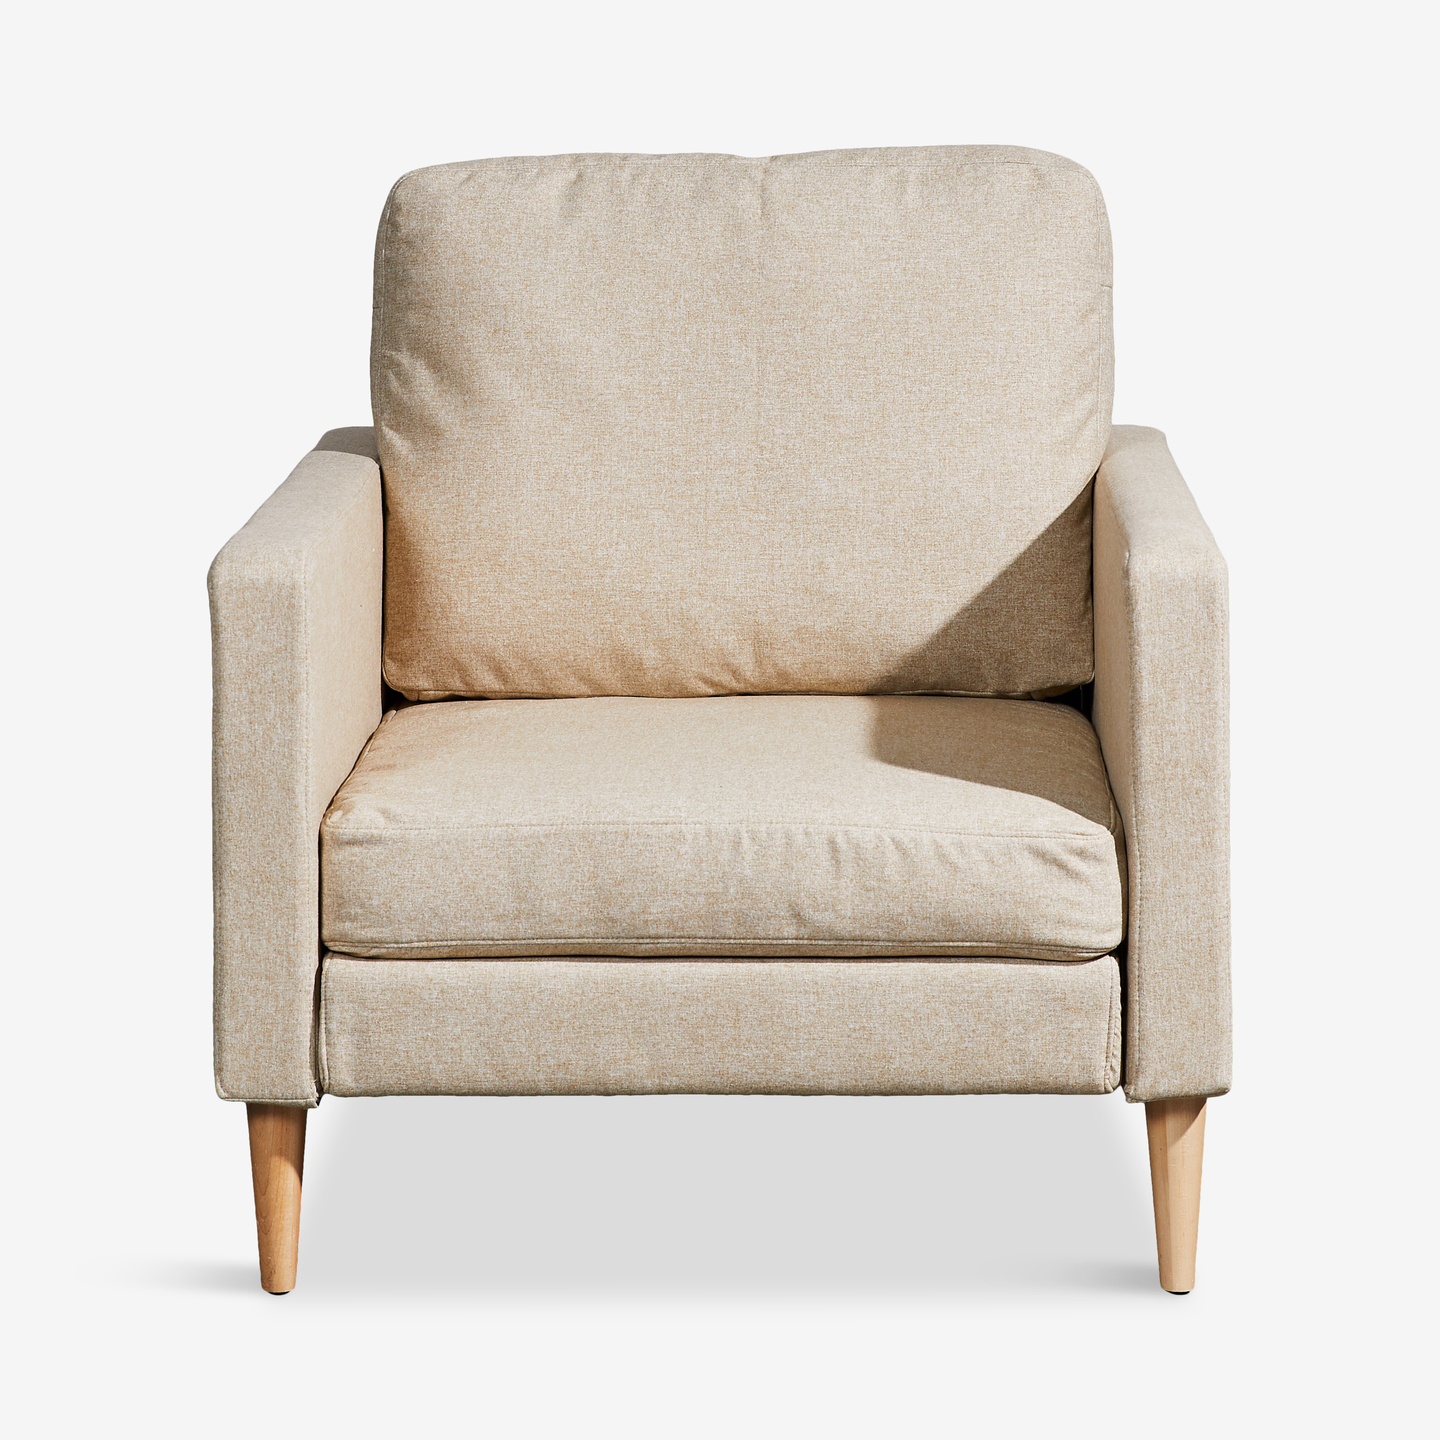 421_Campaign-Chair-Textured-Oat_Flat-Front 2020